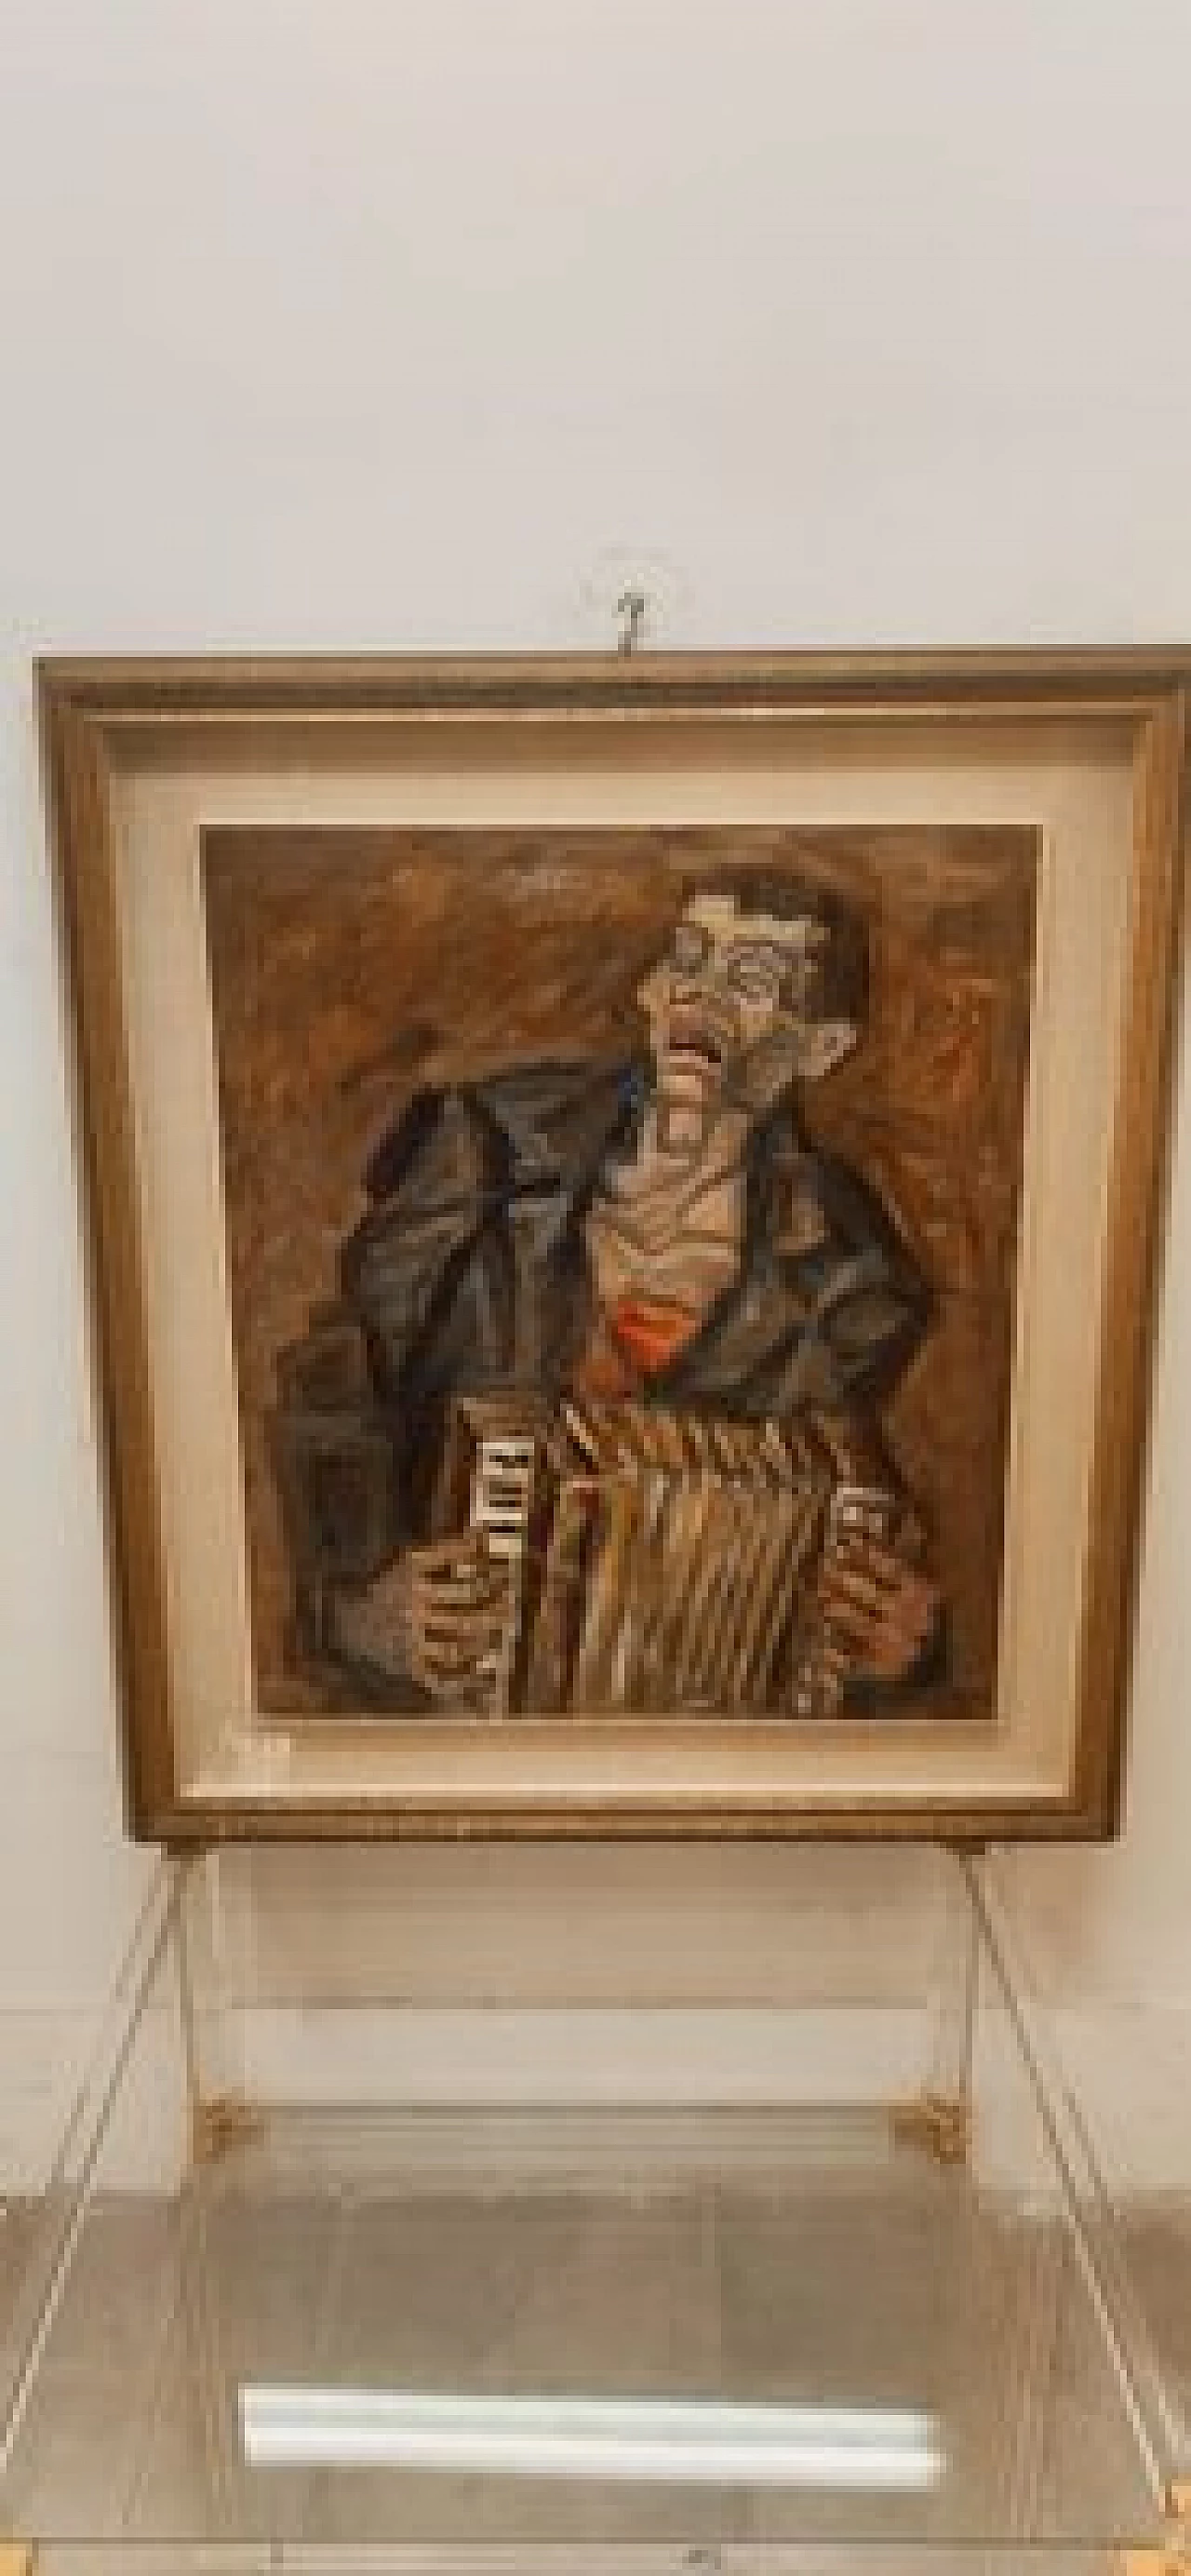 Emilio Notte, The blind musician, oil painting on canvas, 1970s 7